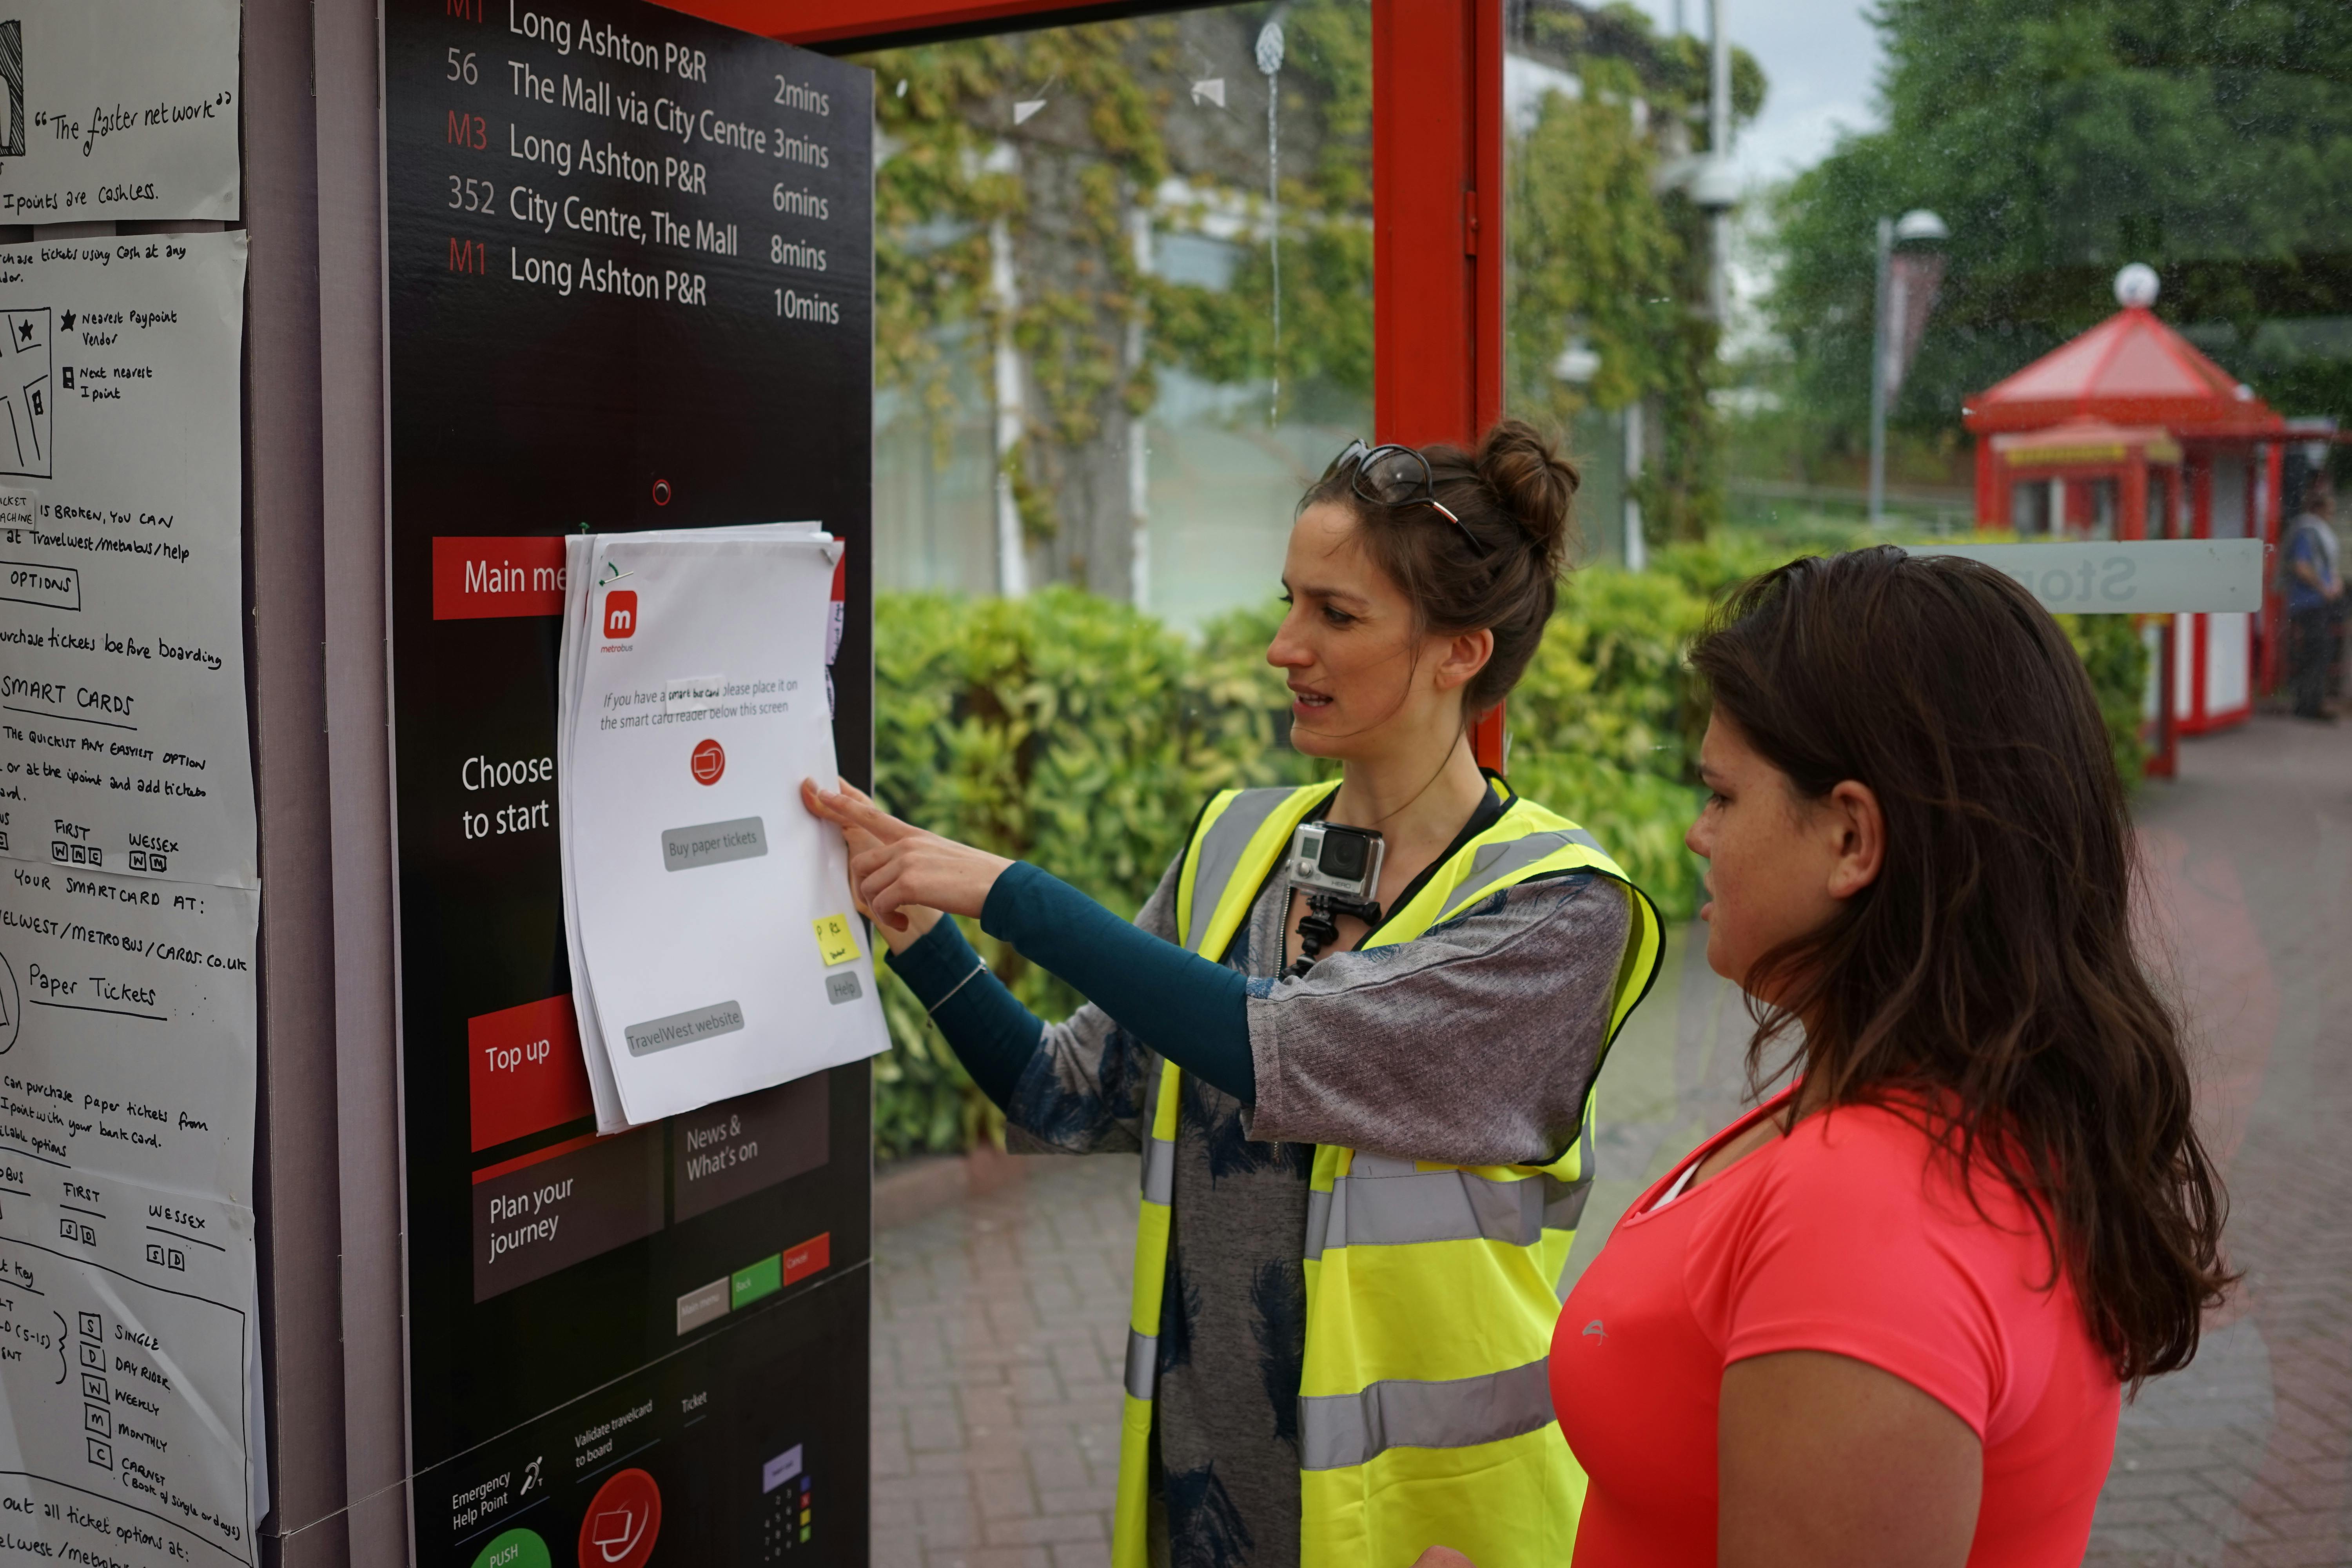 A photo of Anna at a bus stop holding up an A3 piece of paper with ticket purchasing options on, getting feedback from people who use the bus